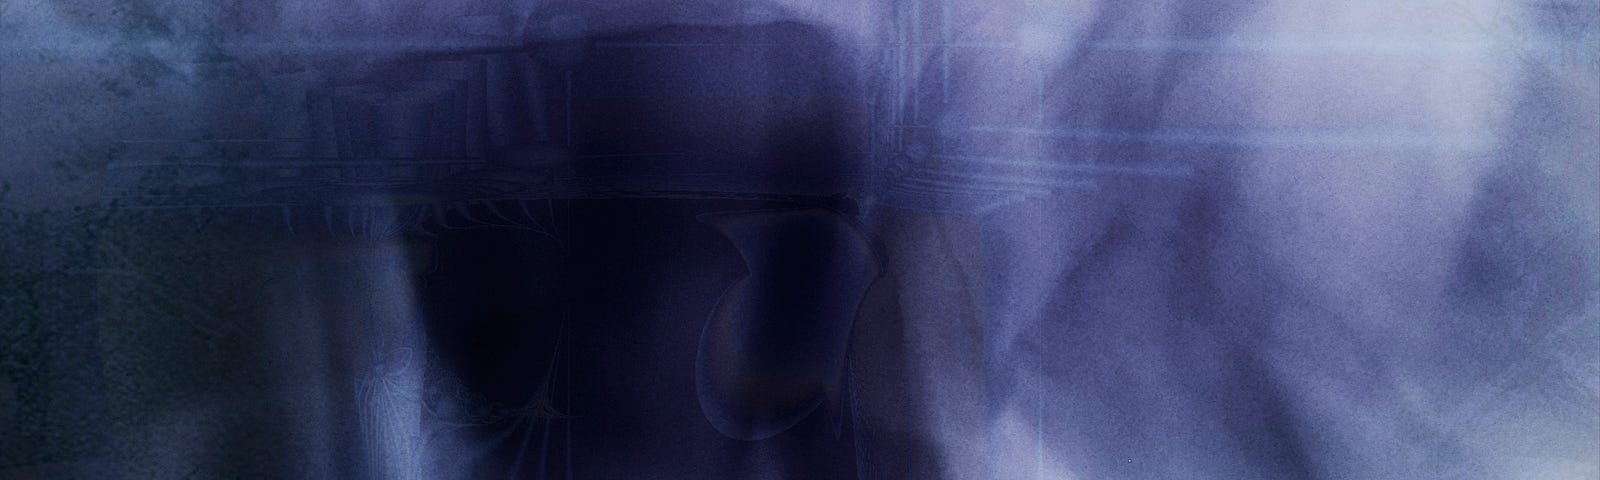 Abstract composite image of a figure wrapped in gauze, head bowed, with textural overlays in a periwinkle hue.